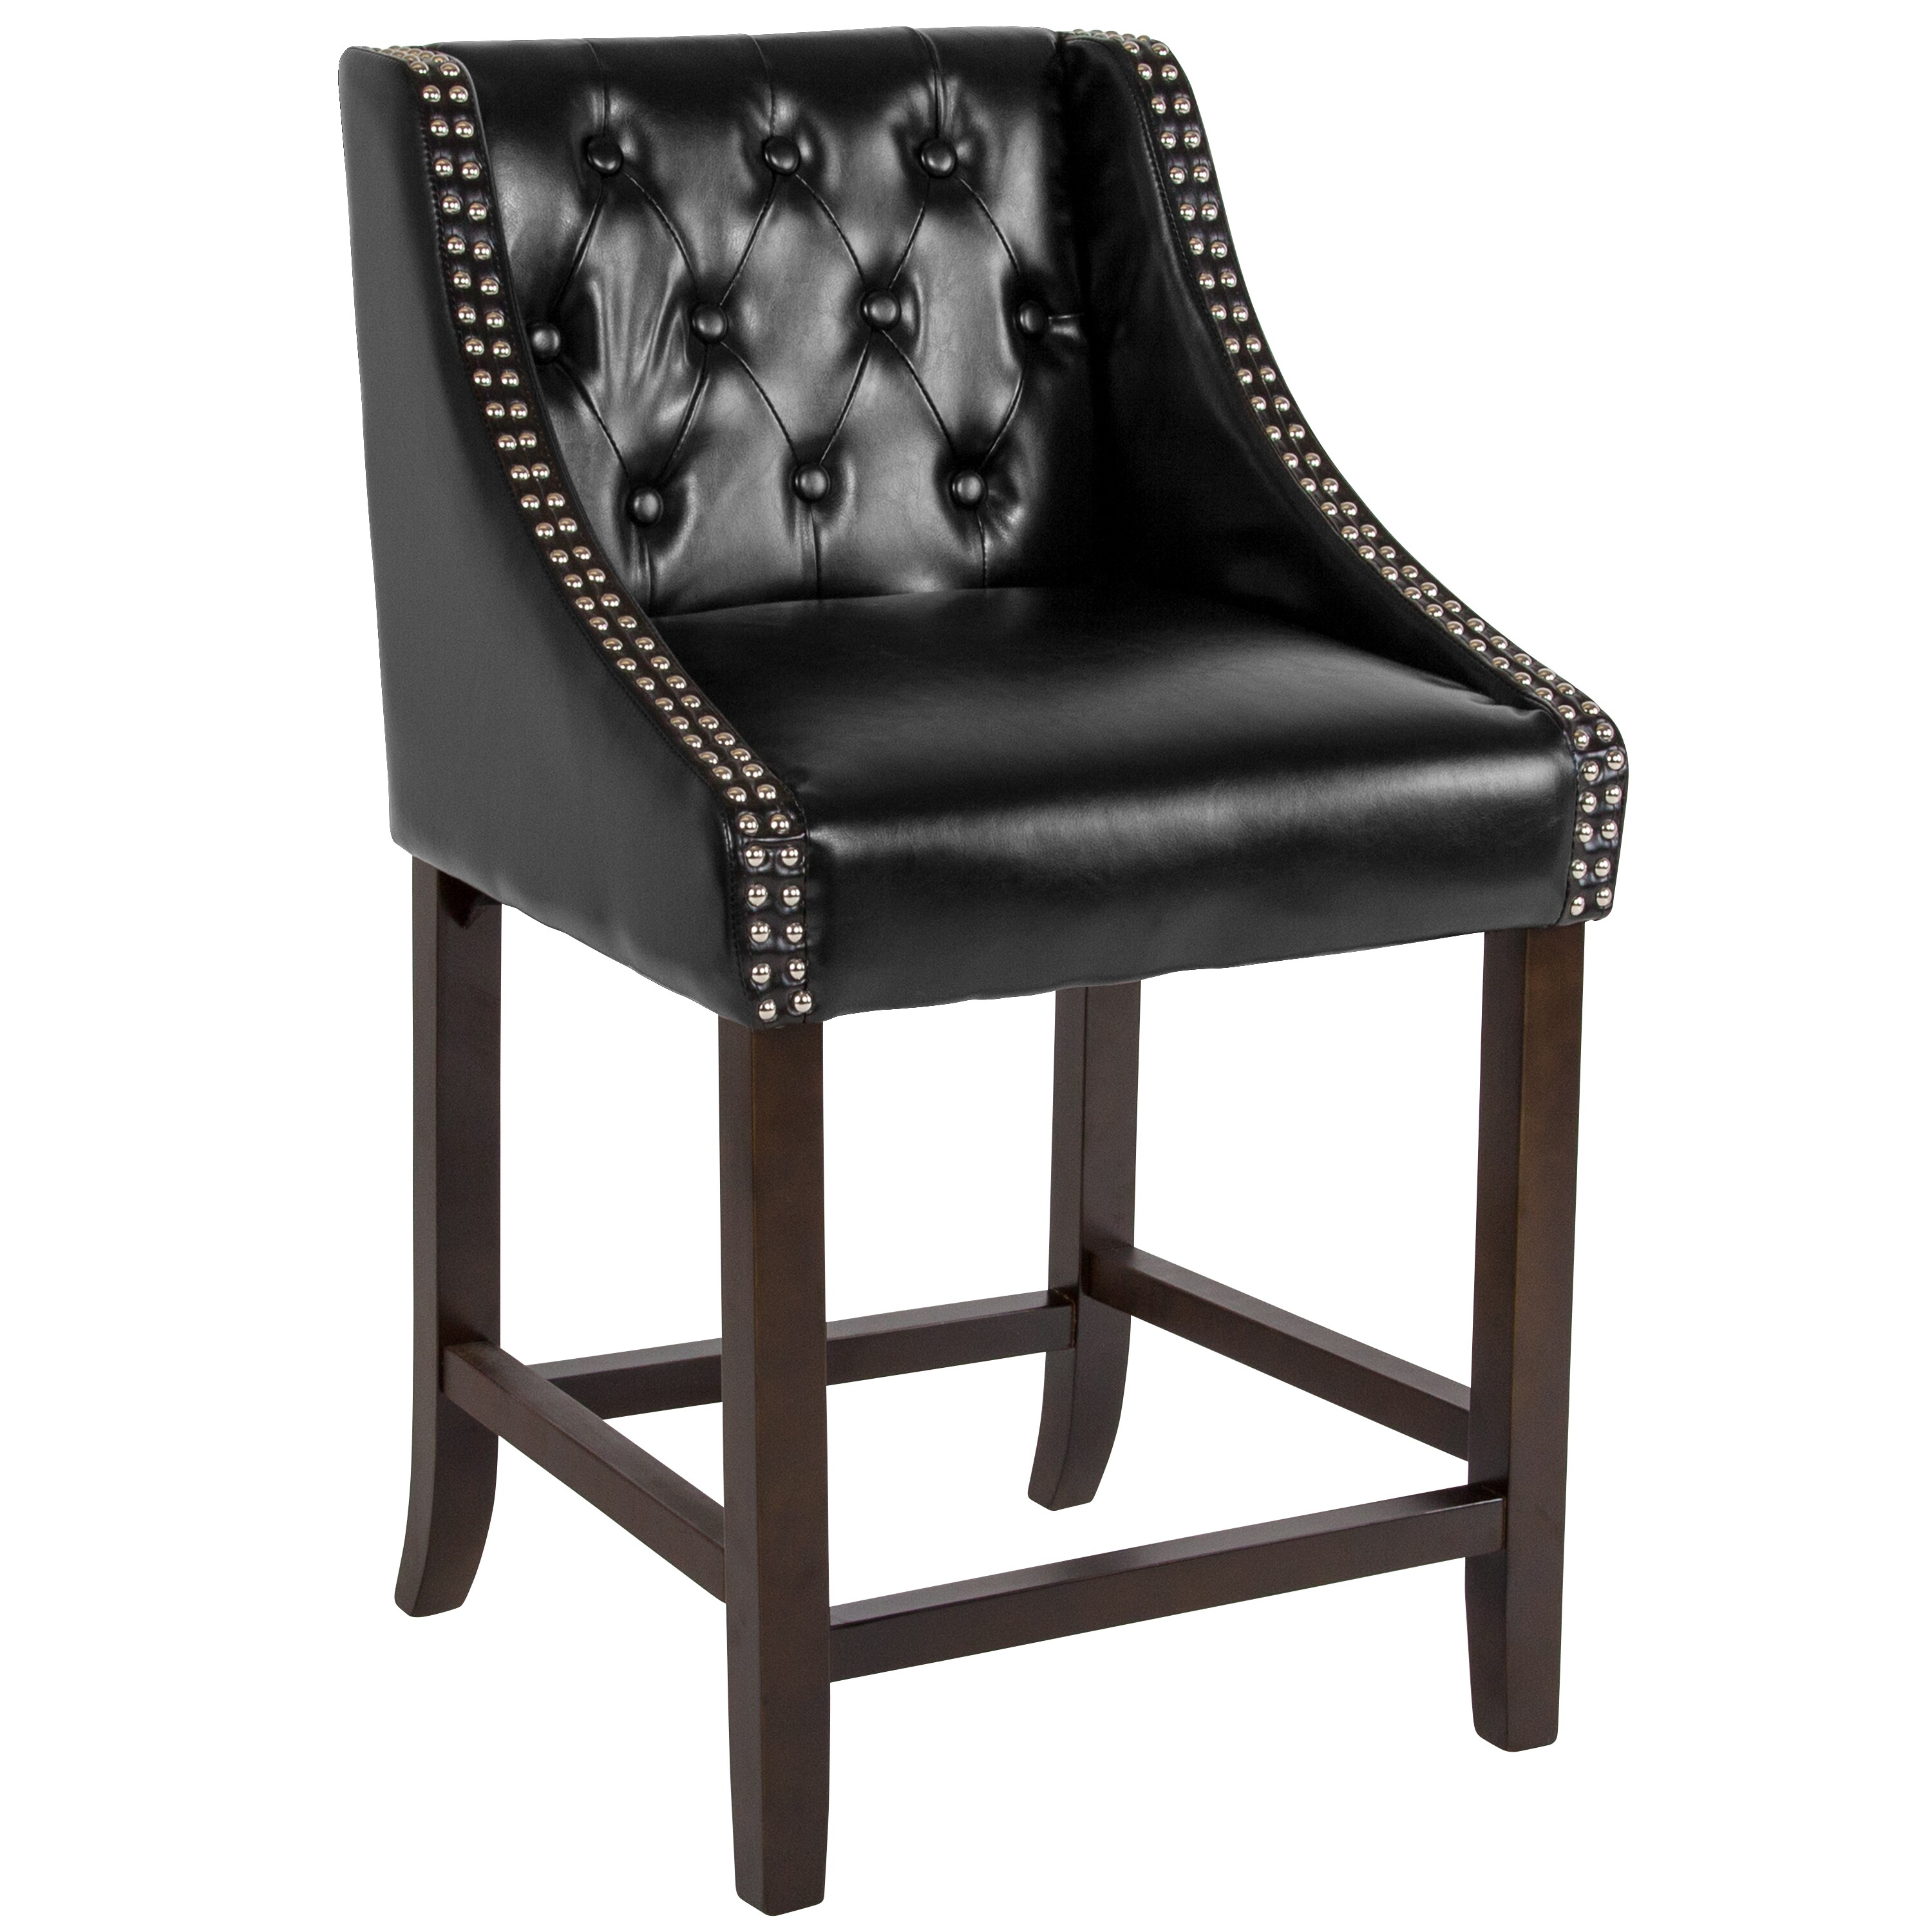 Upholstered Bar Stool In The Stools, Black Leather Counter Height Chairs